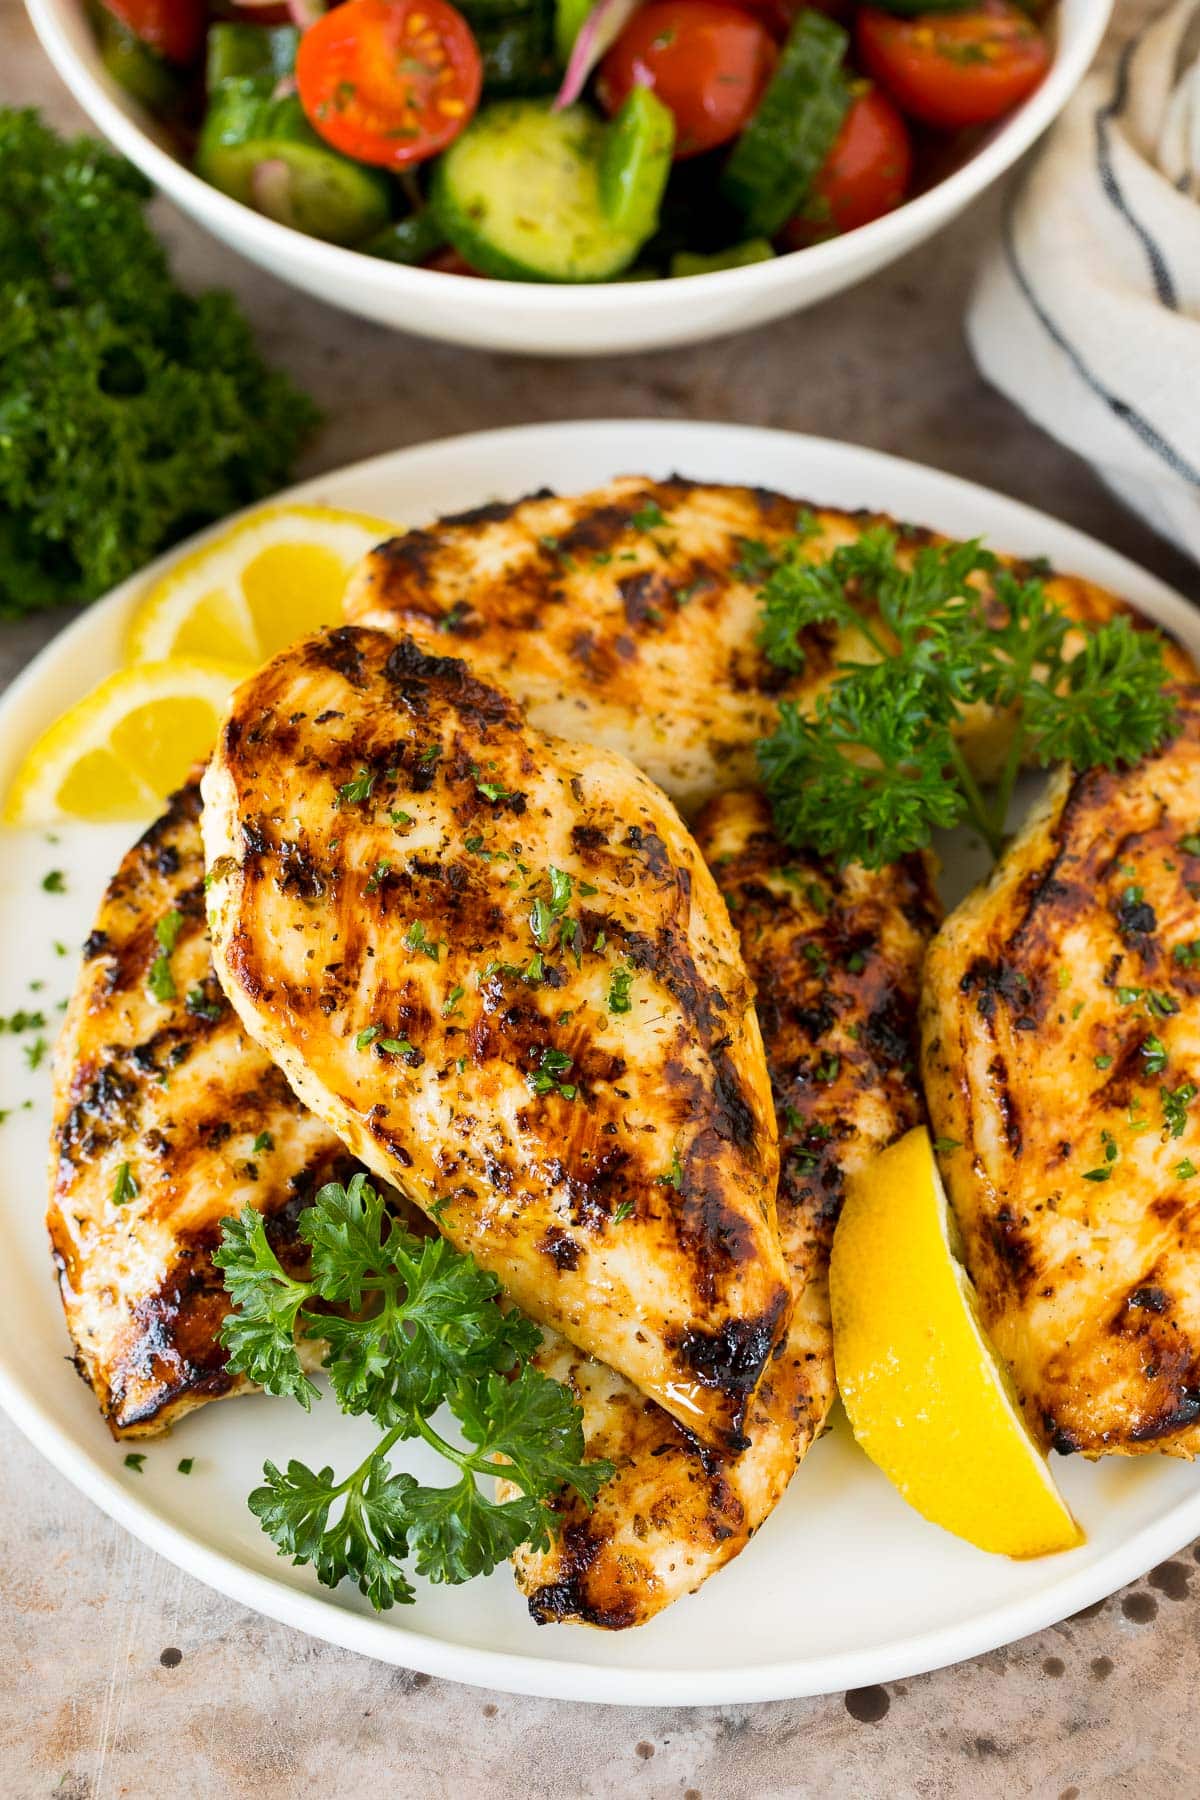 Greek lemon chicken on a plate with lemon and herbs.